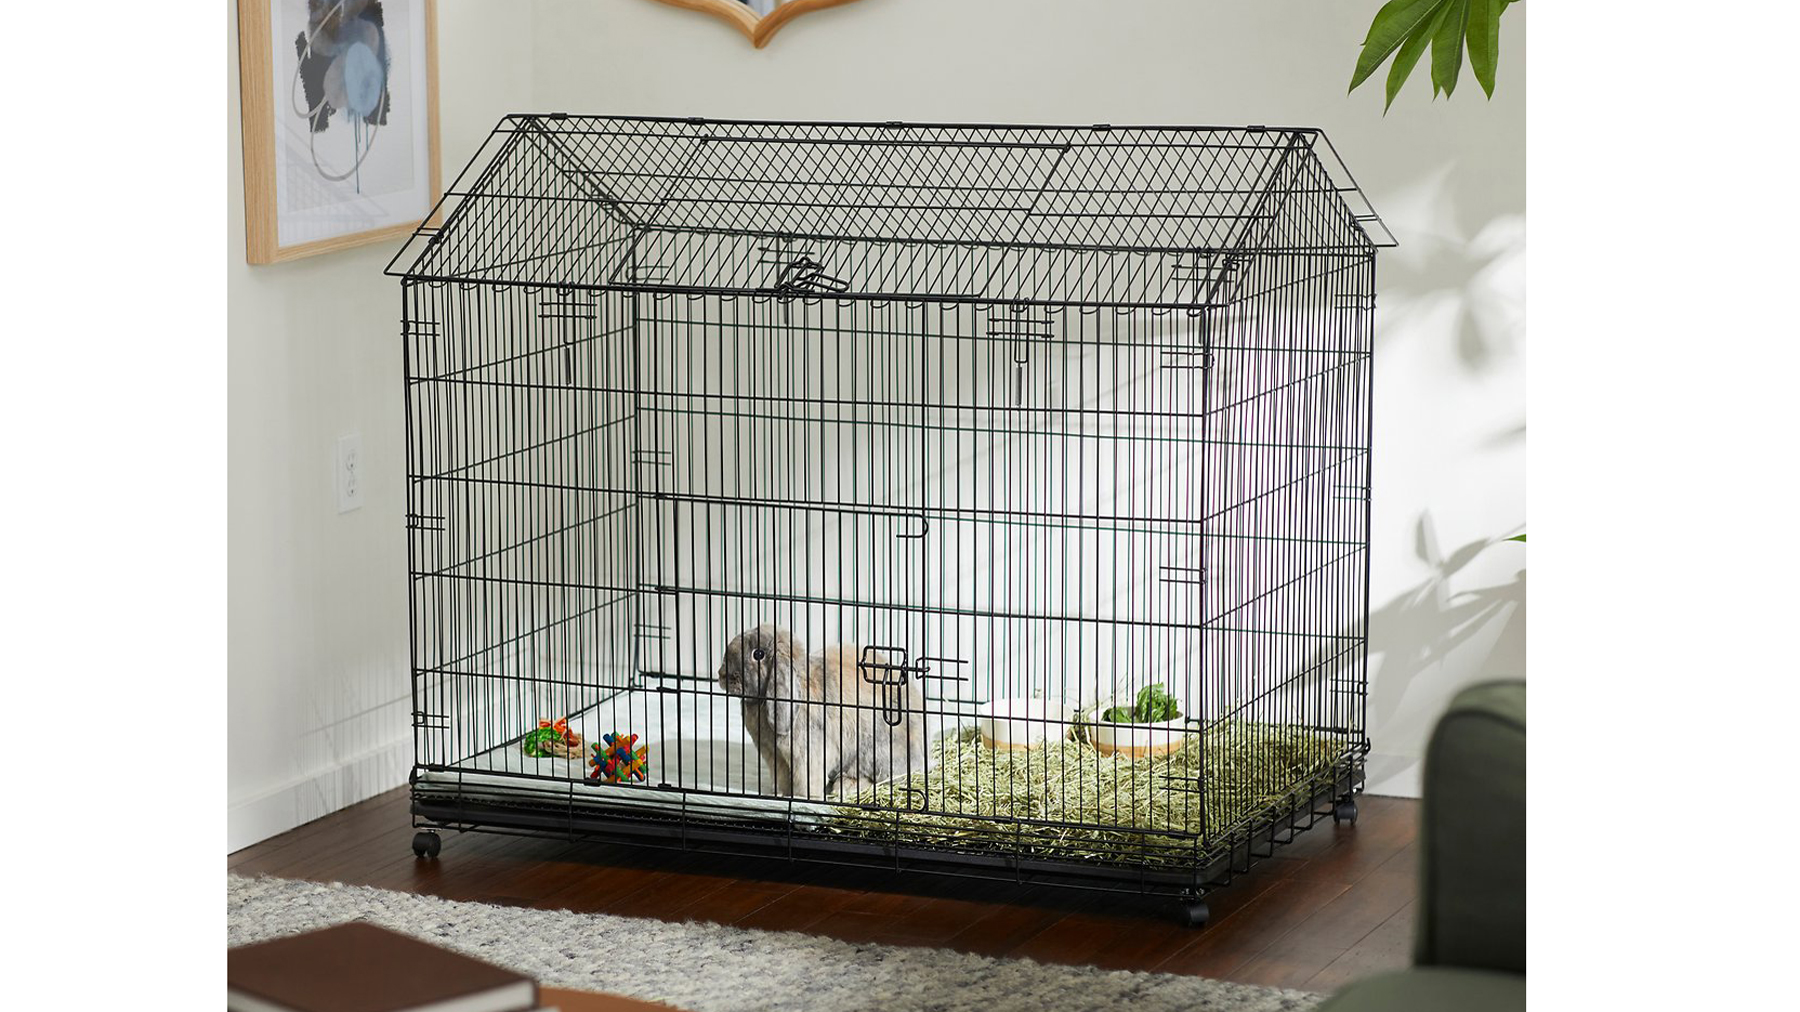 Frisco Wire Small Pet House Shaped Cage